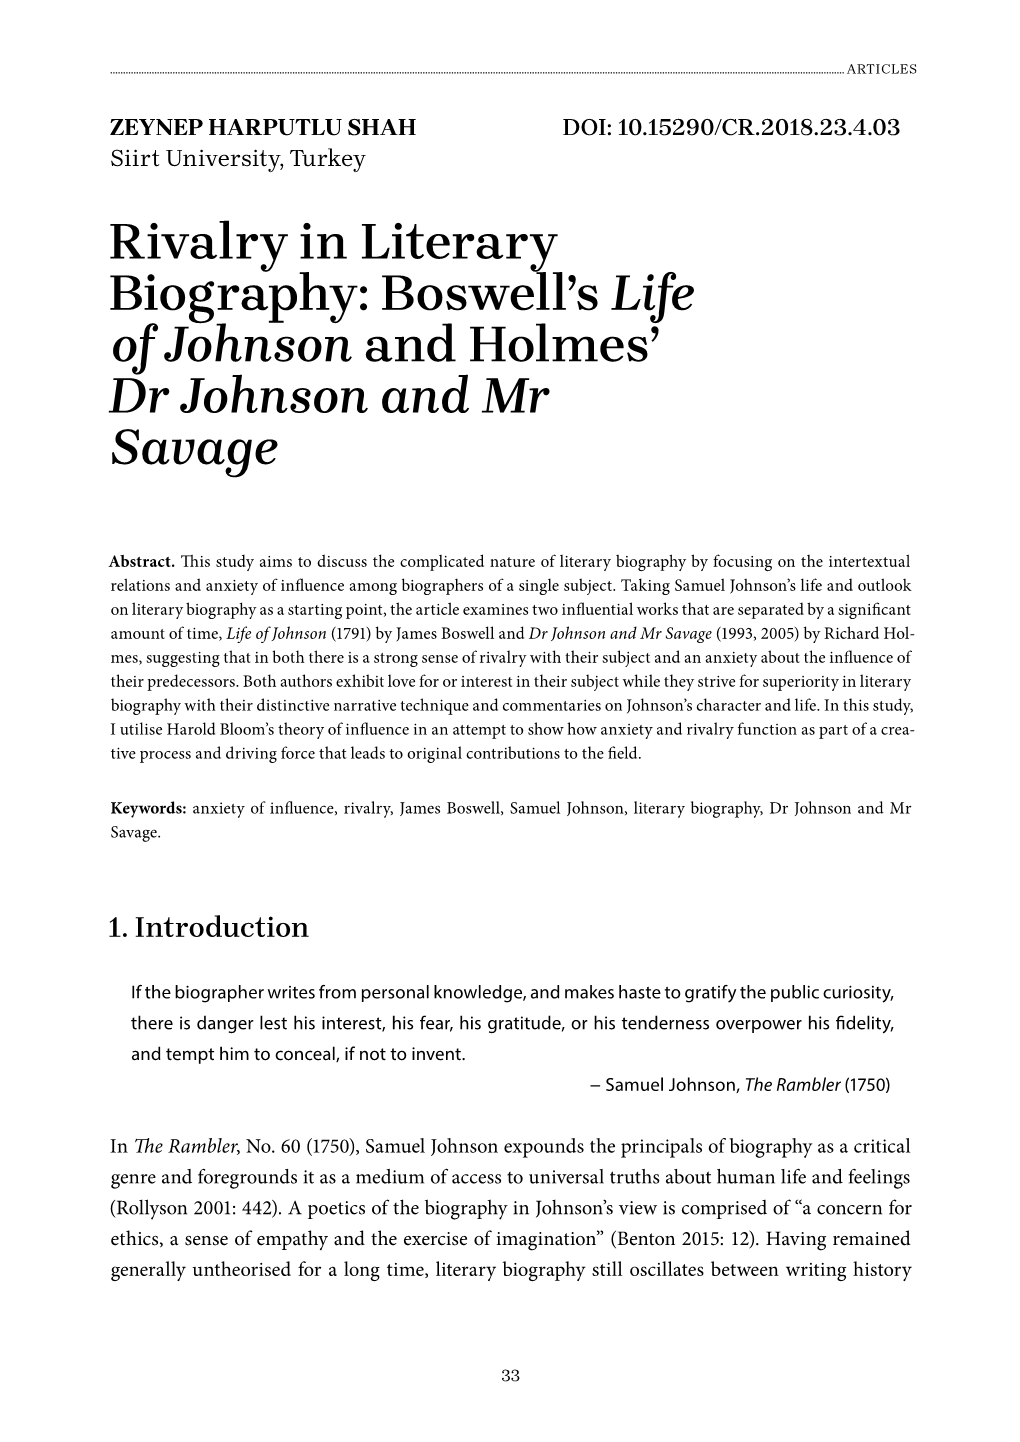 Rivalry in Literary Biography: Boswell’S Life of Johnson and Holmes’ Dr Johnson and Mr Savage